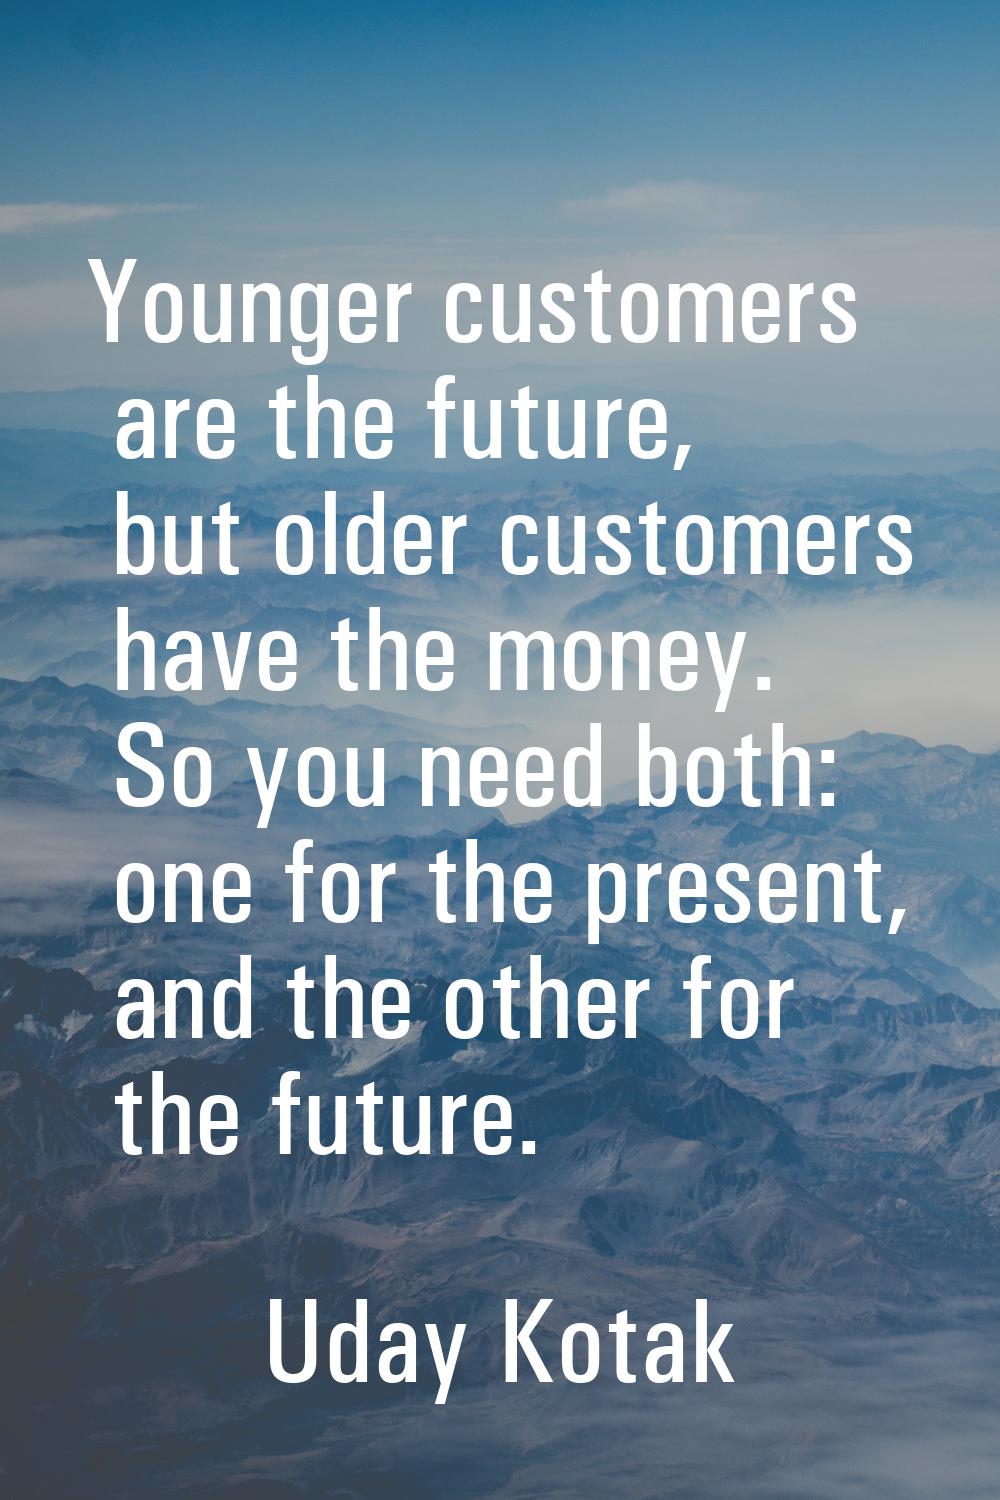 Younger customers are the future, but older customers have the money. So you need both: one for the